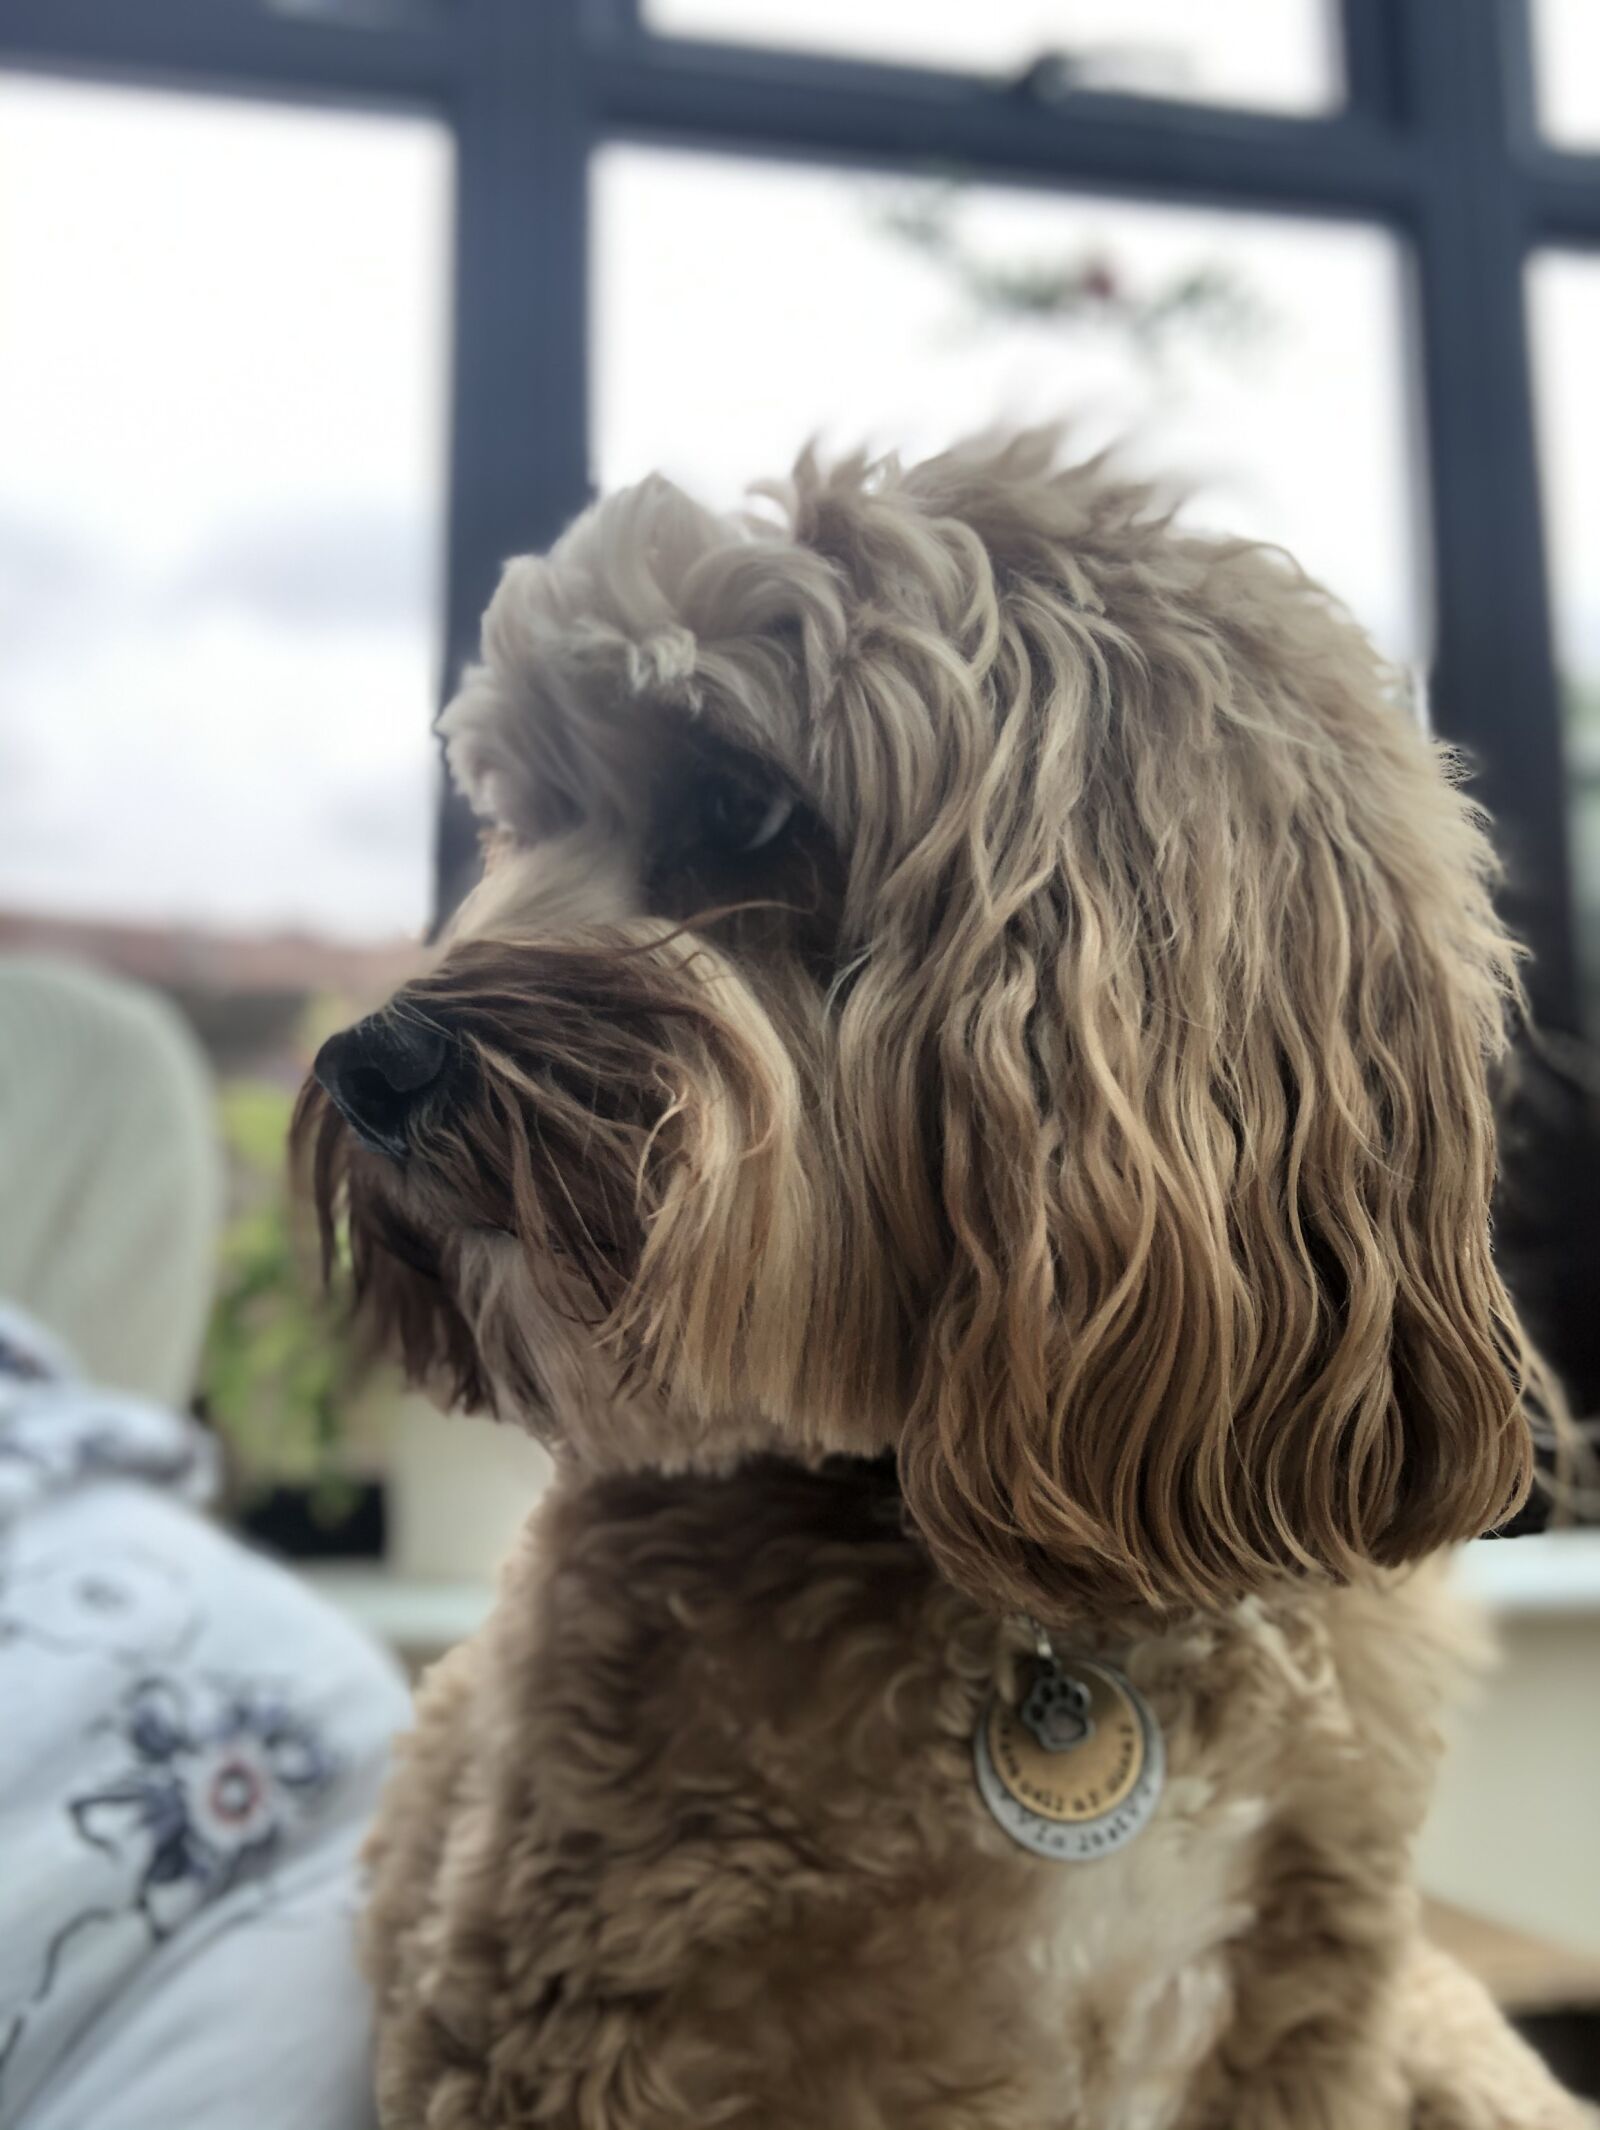 iPhone X front TrueDepth camera 2.87mm f/2.2 sample photo. Cockapoo, dog, cute photography